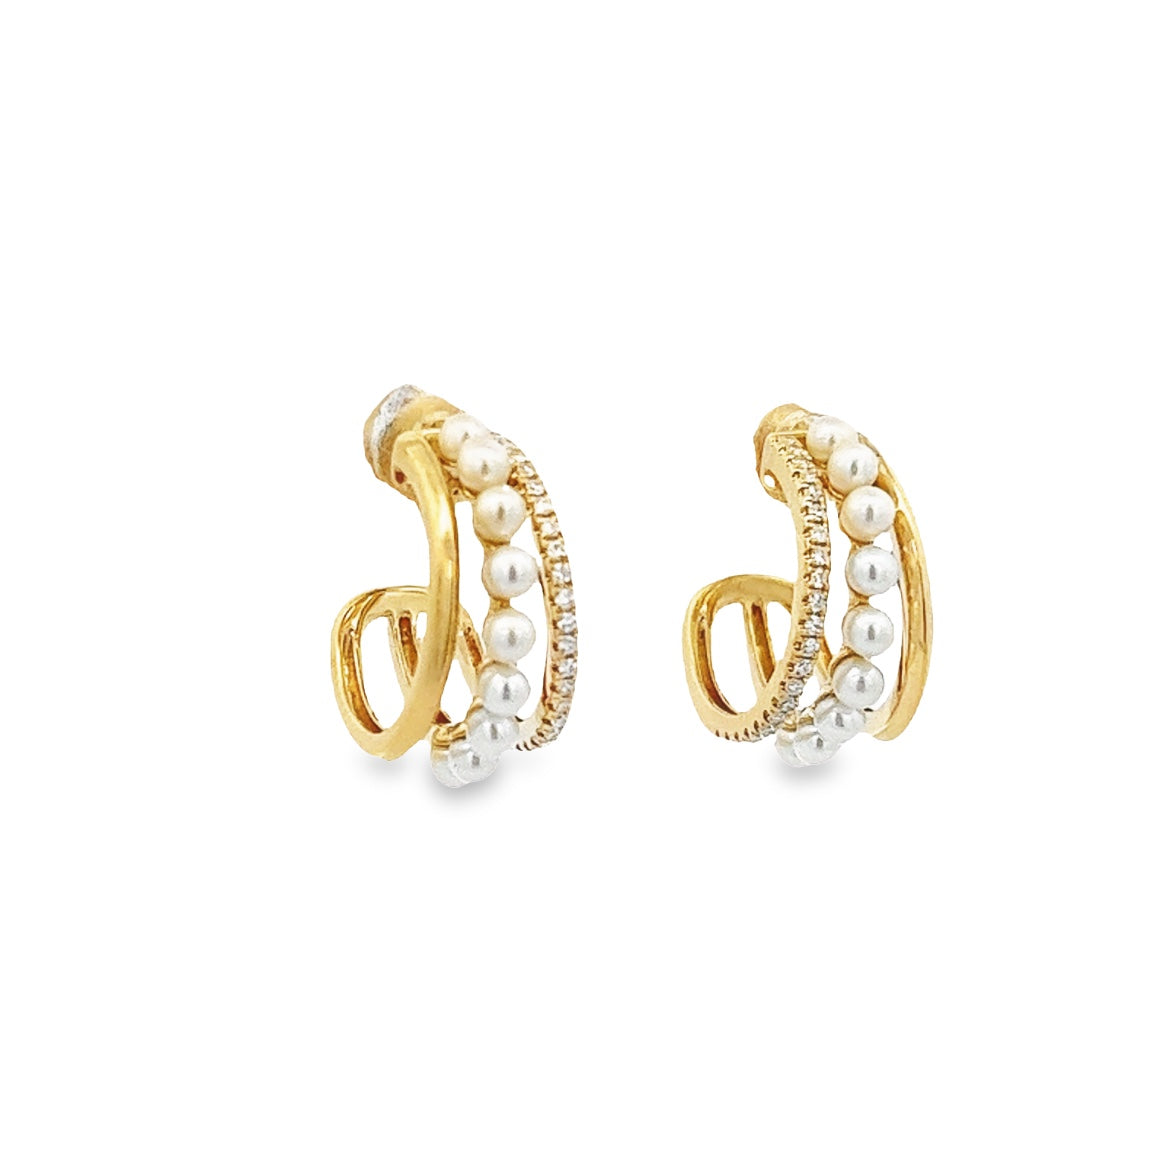 14K GOLD PEARL AND DIAMOND EARRING